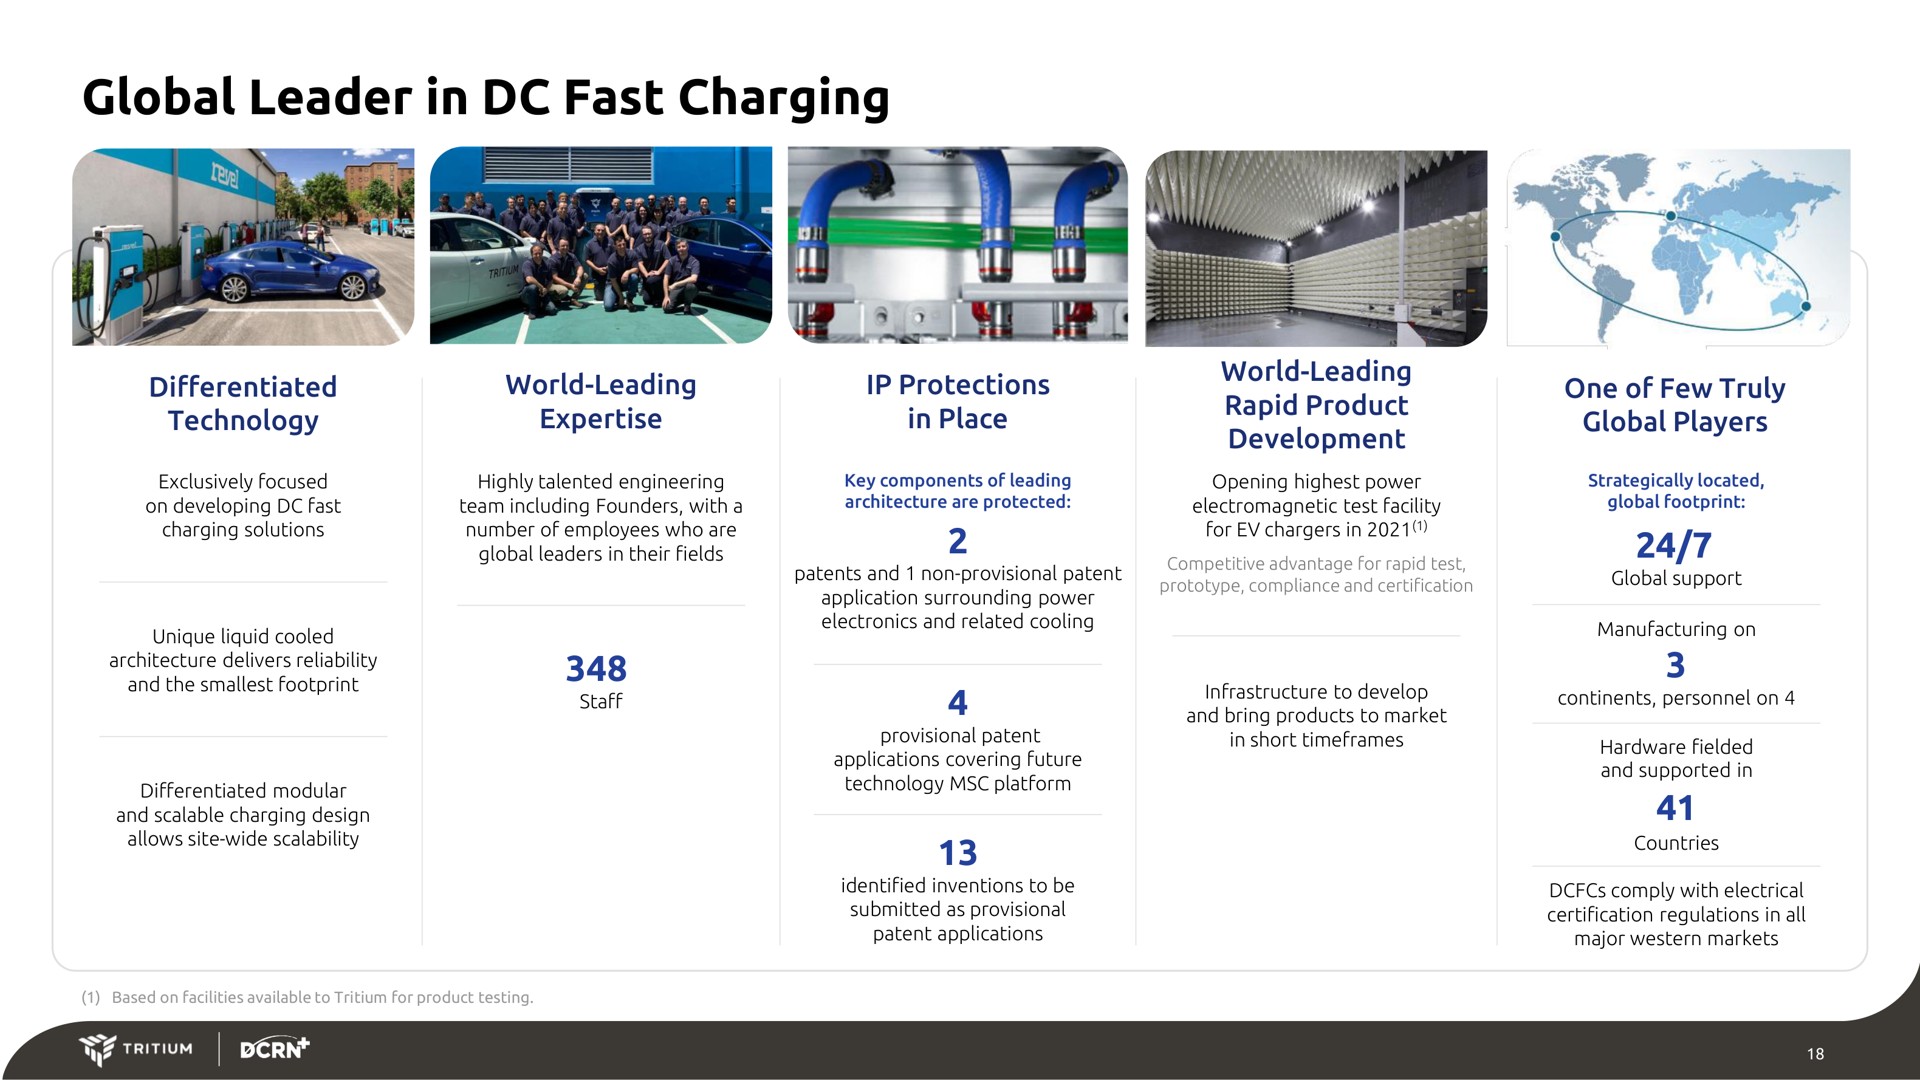 global leader in fast charging technology place players | Tritium